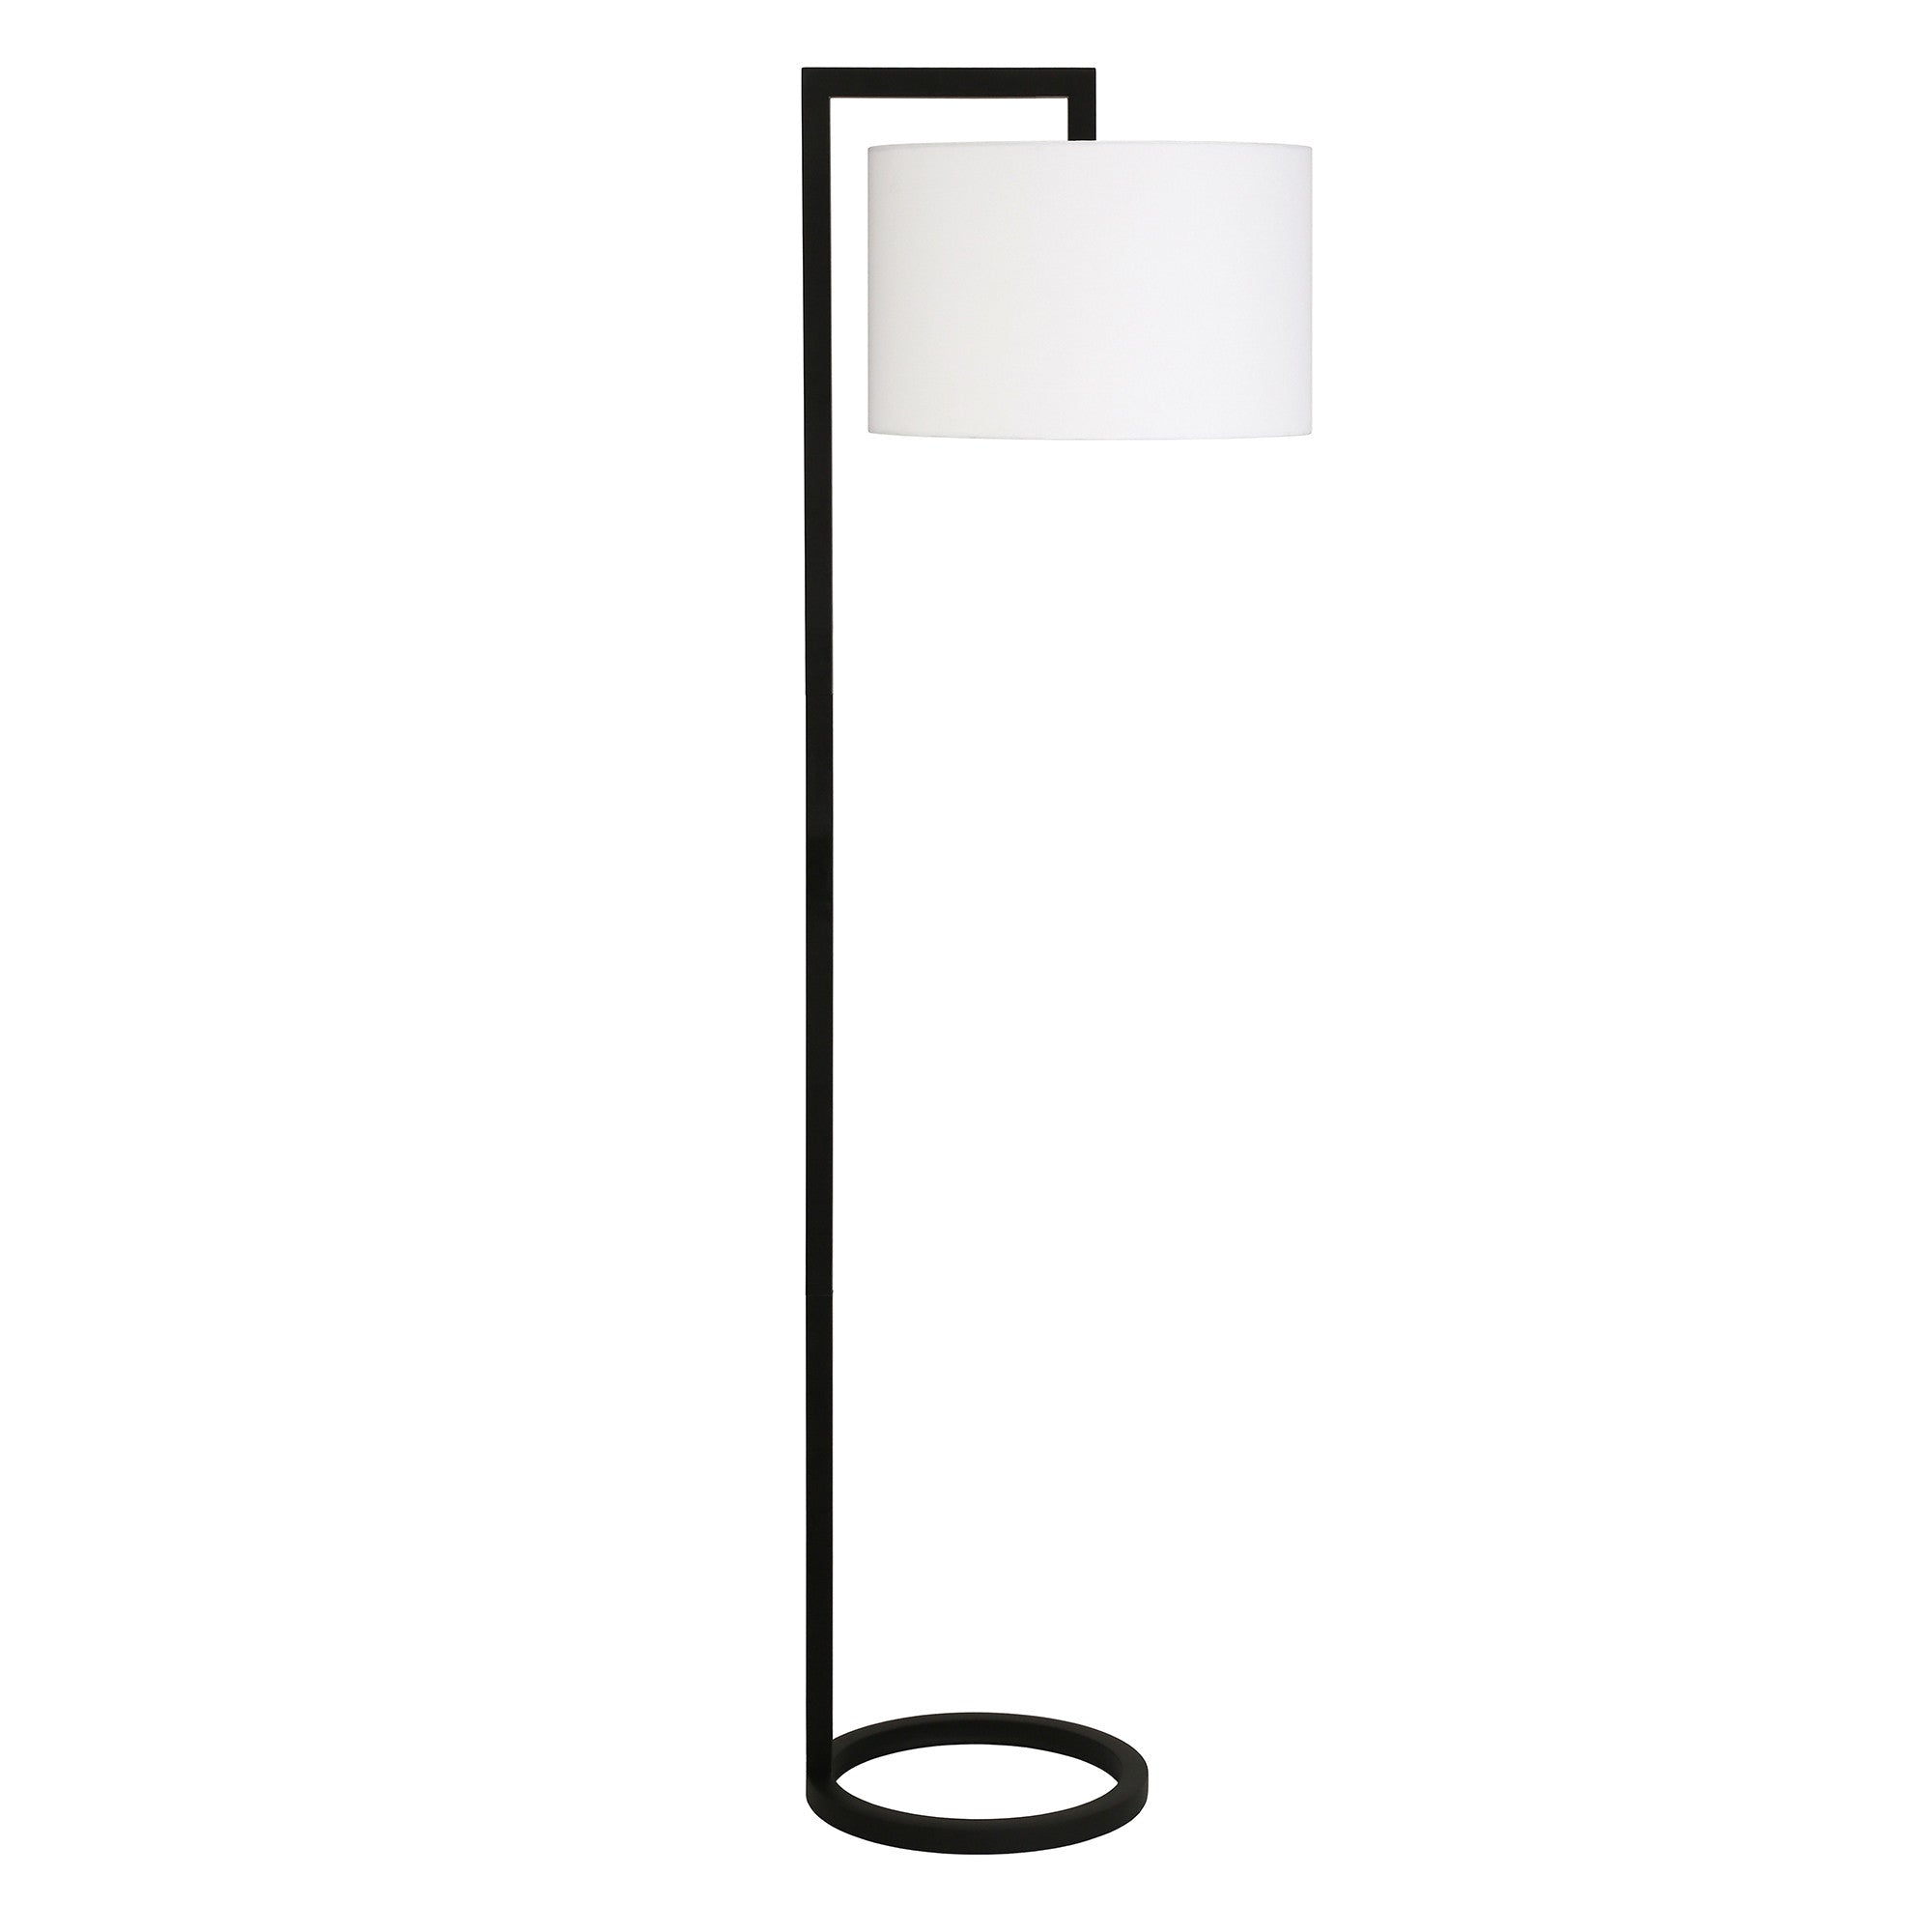 64" Black Traditional Shaped Floor Lamp With White Frosted Glass Drum Shade